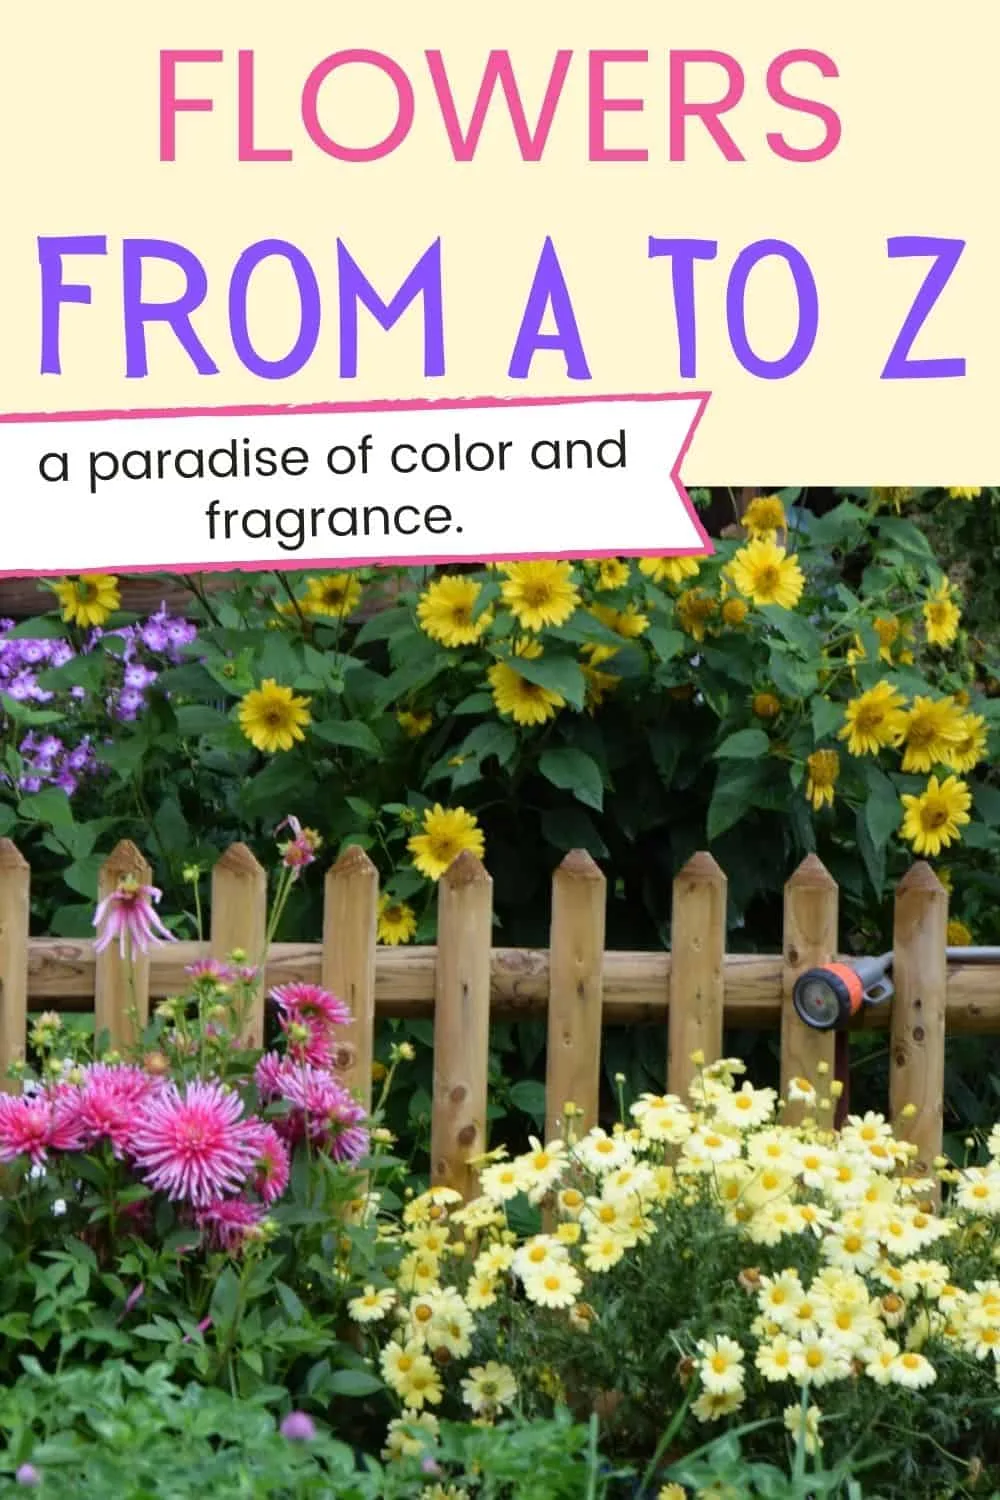 Flowers from A to Z - a paradise of color and fragrance